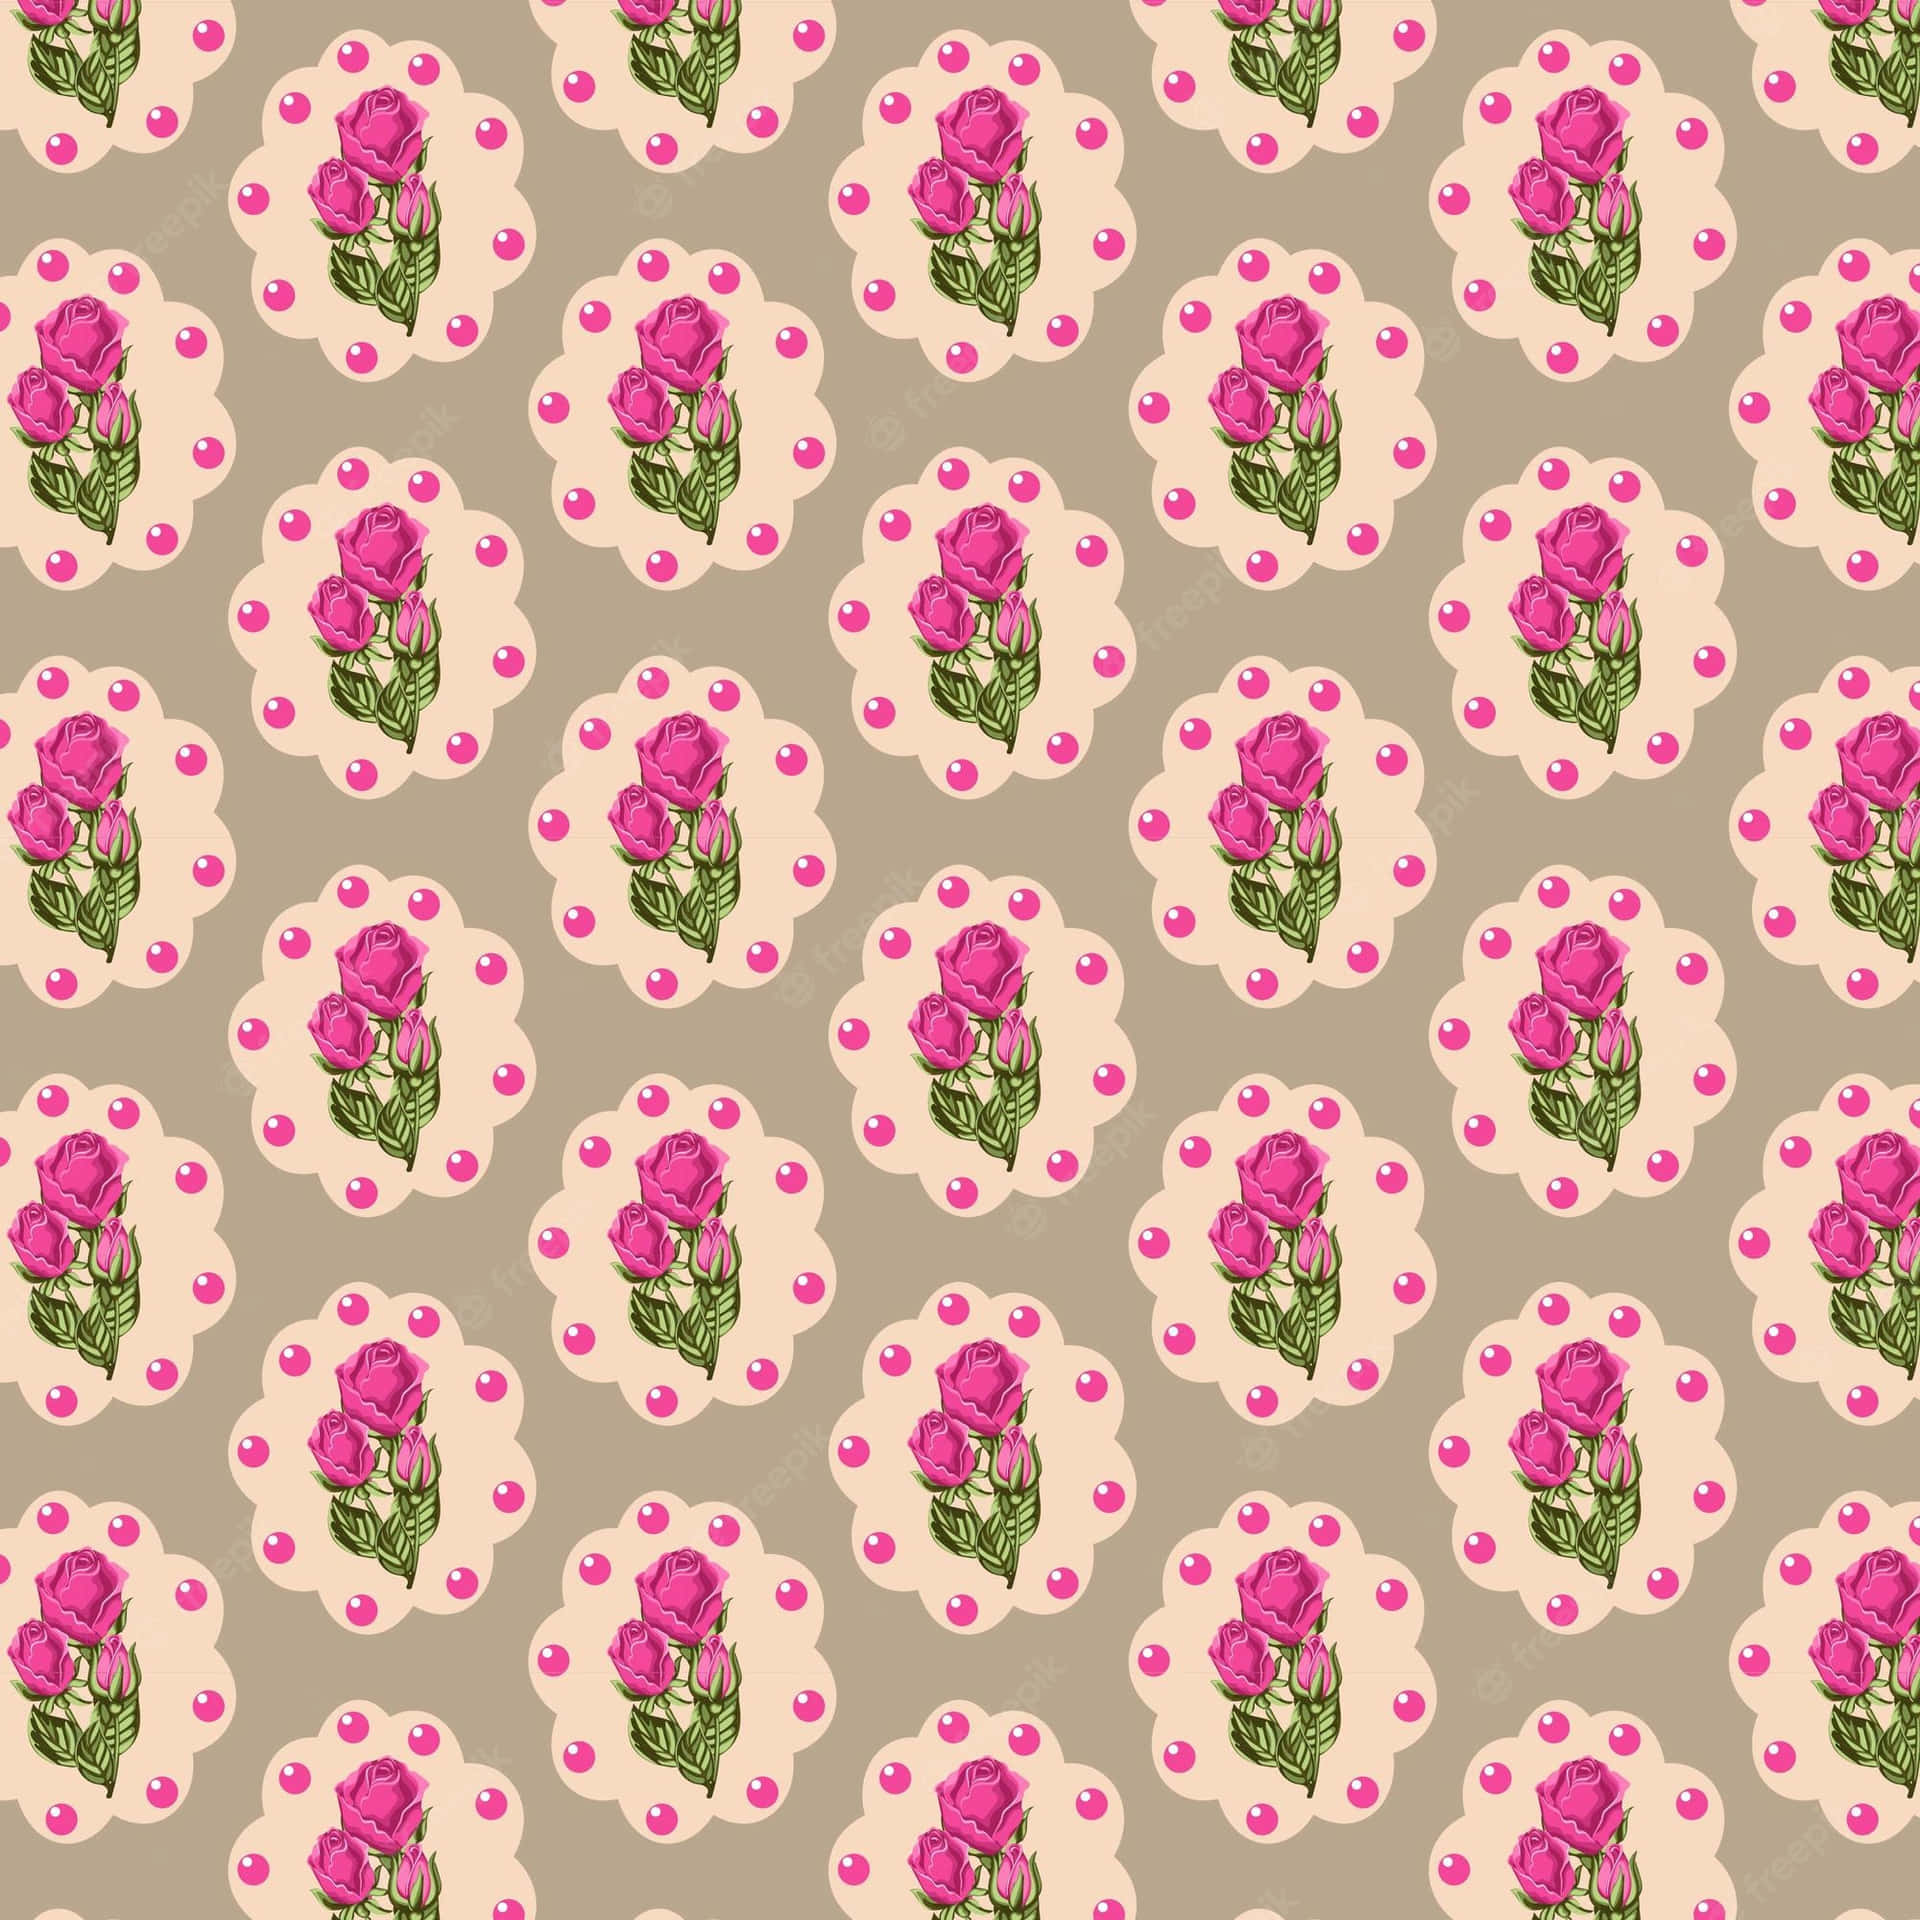 Get your fashion on with Cute Trendy Wallpaper